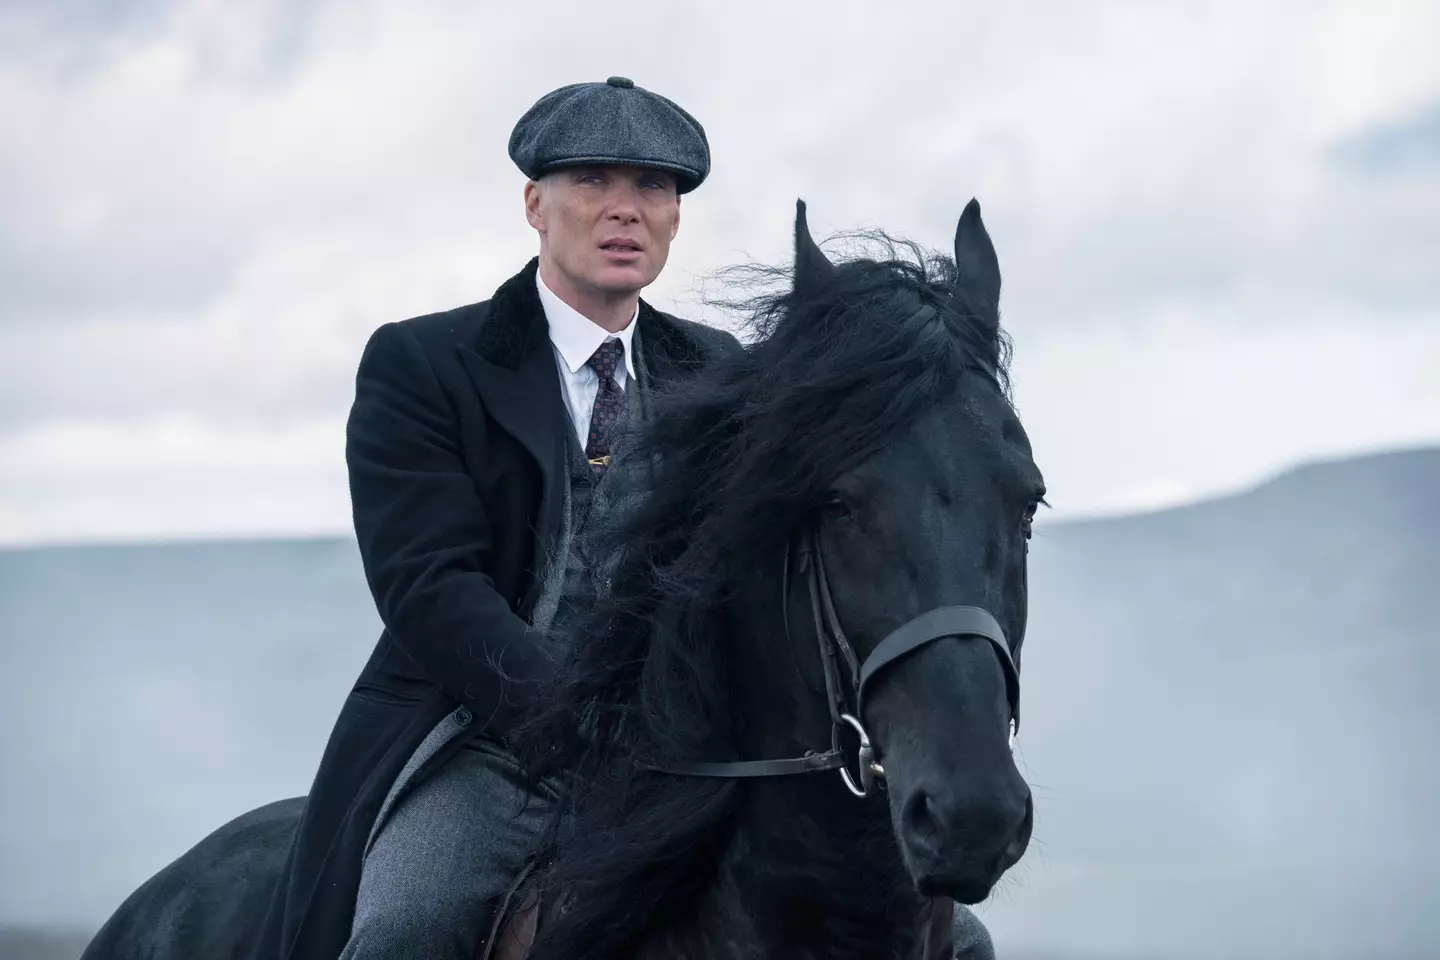 Cillian Murphy is set to start in the film adaptation.